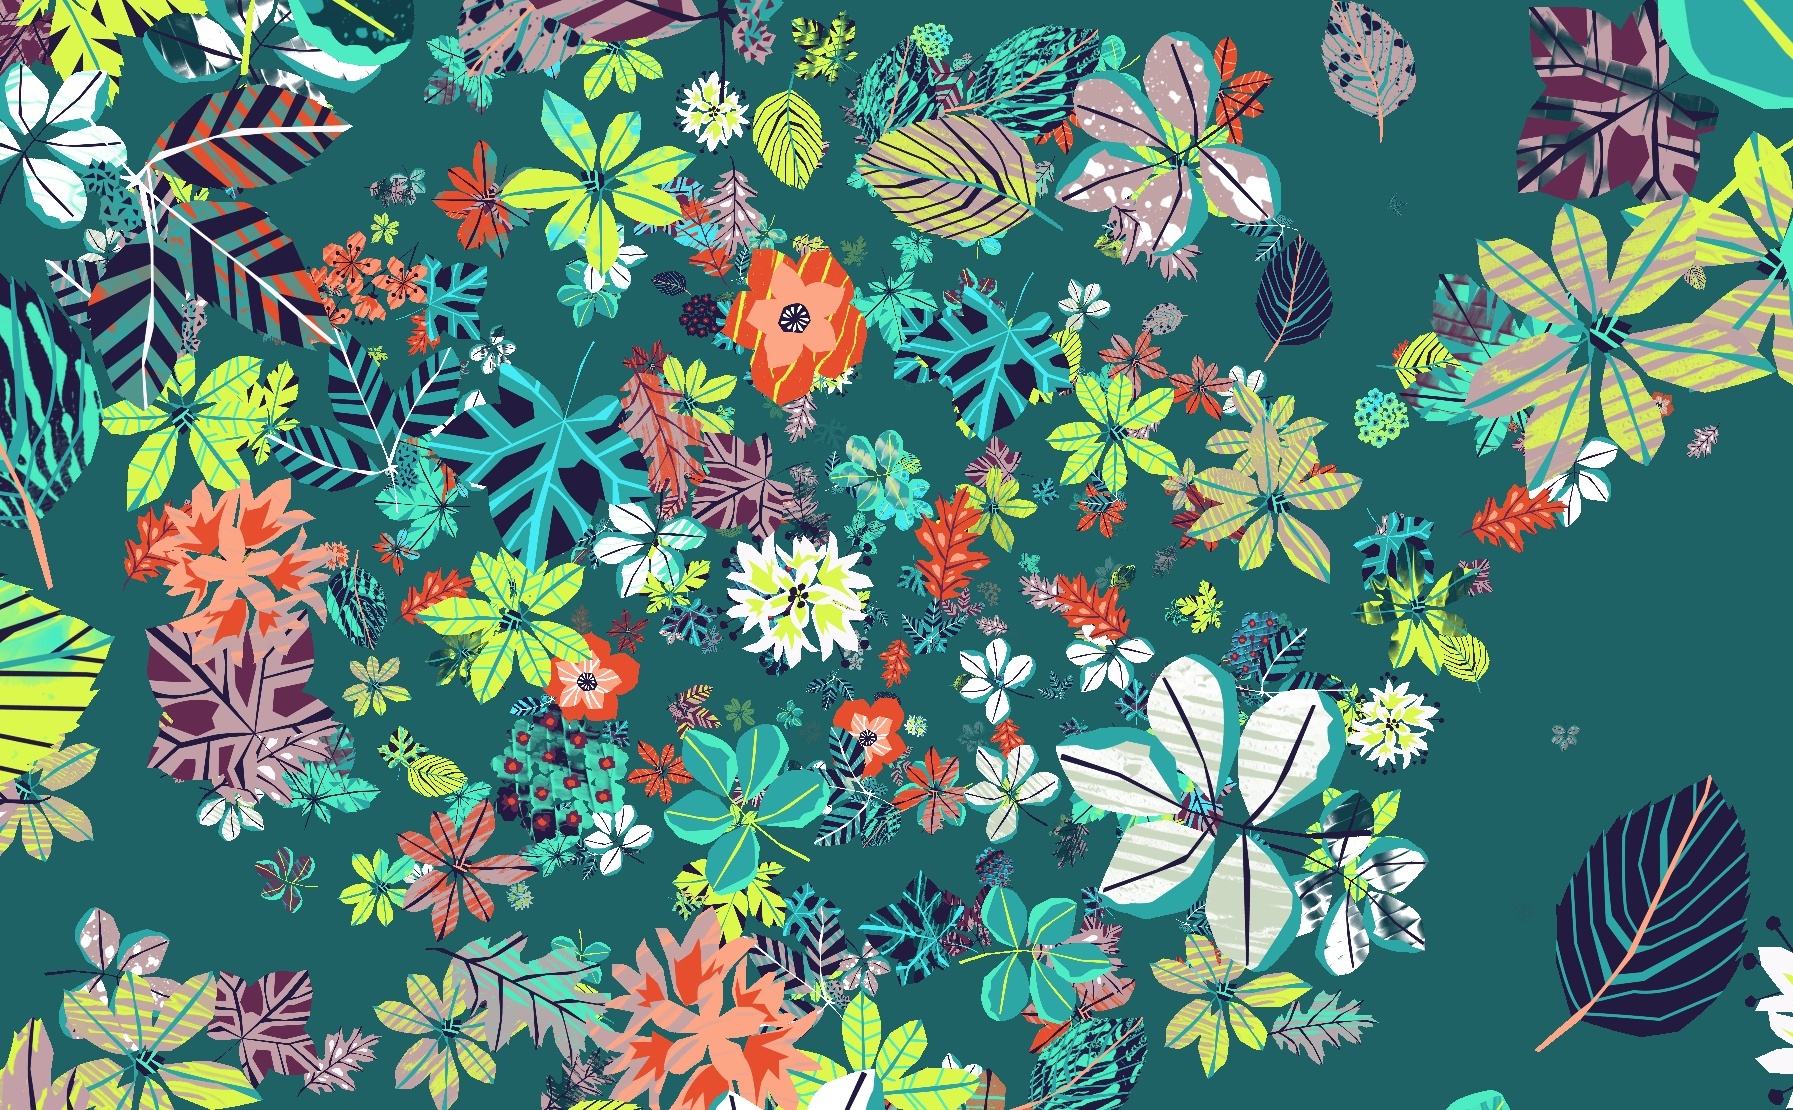 A cluster of tropical flowers and plants, generated through data visualisation